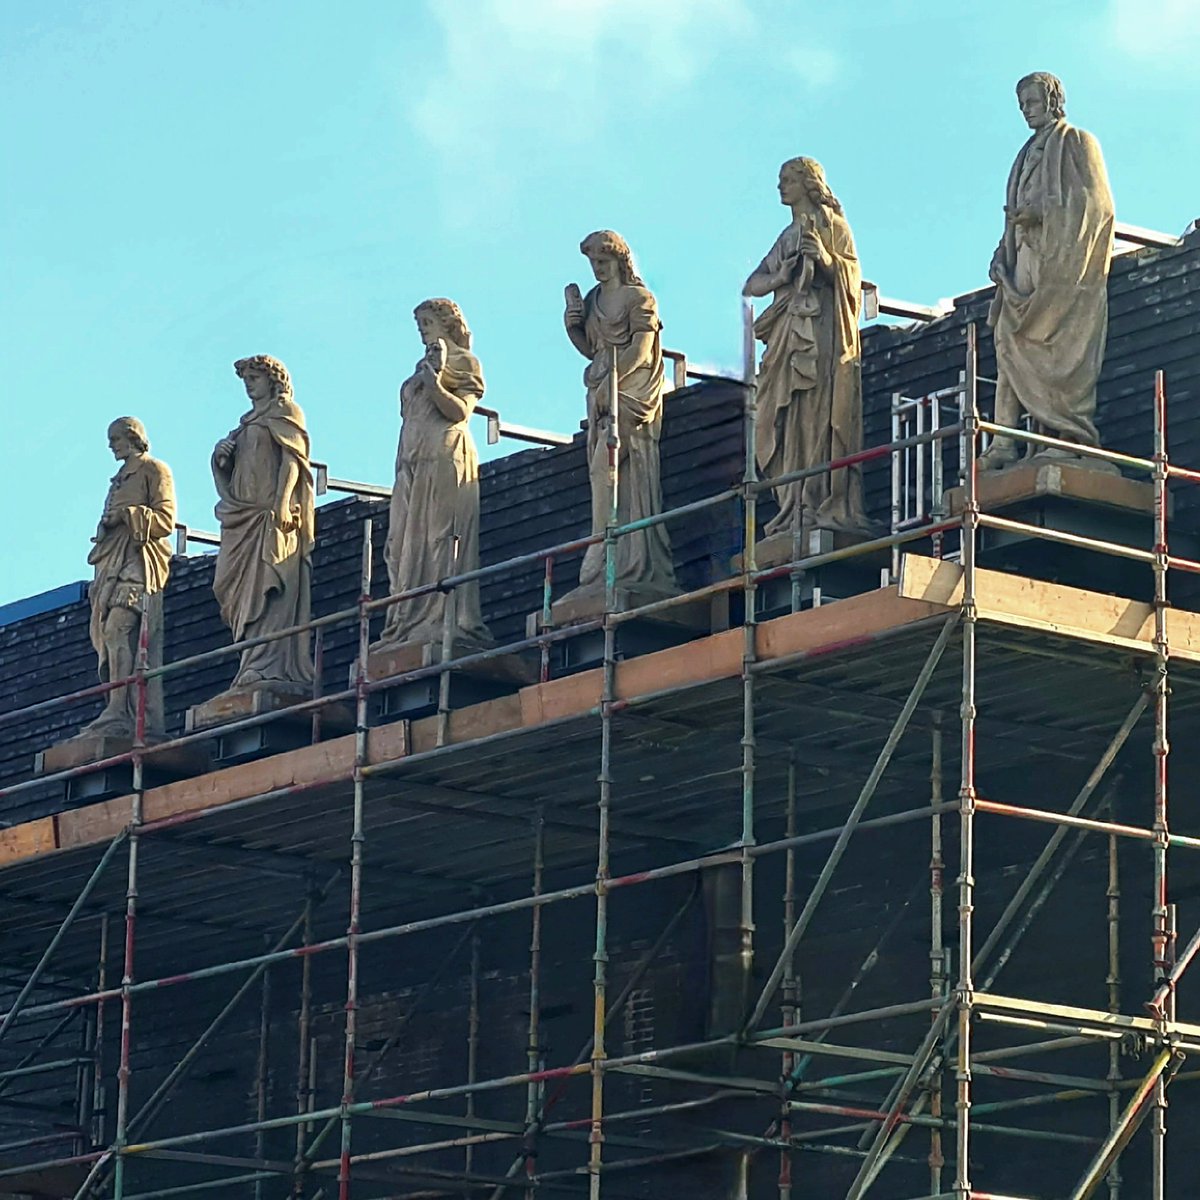 Rabbie and the gang being returned to the roof of the Citizen's Theatre on the southside of Glasgow. Cont./ #glasgow #johnmossman #thegorbals #citizenstheatre #architecture #sculpture